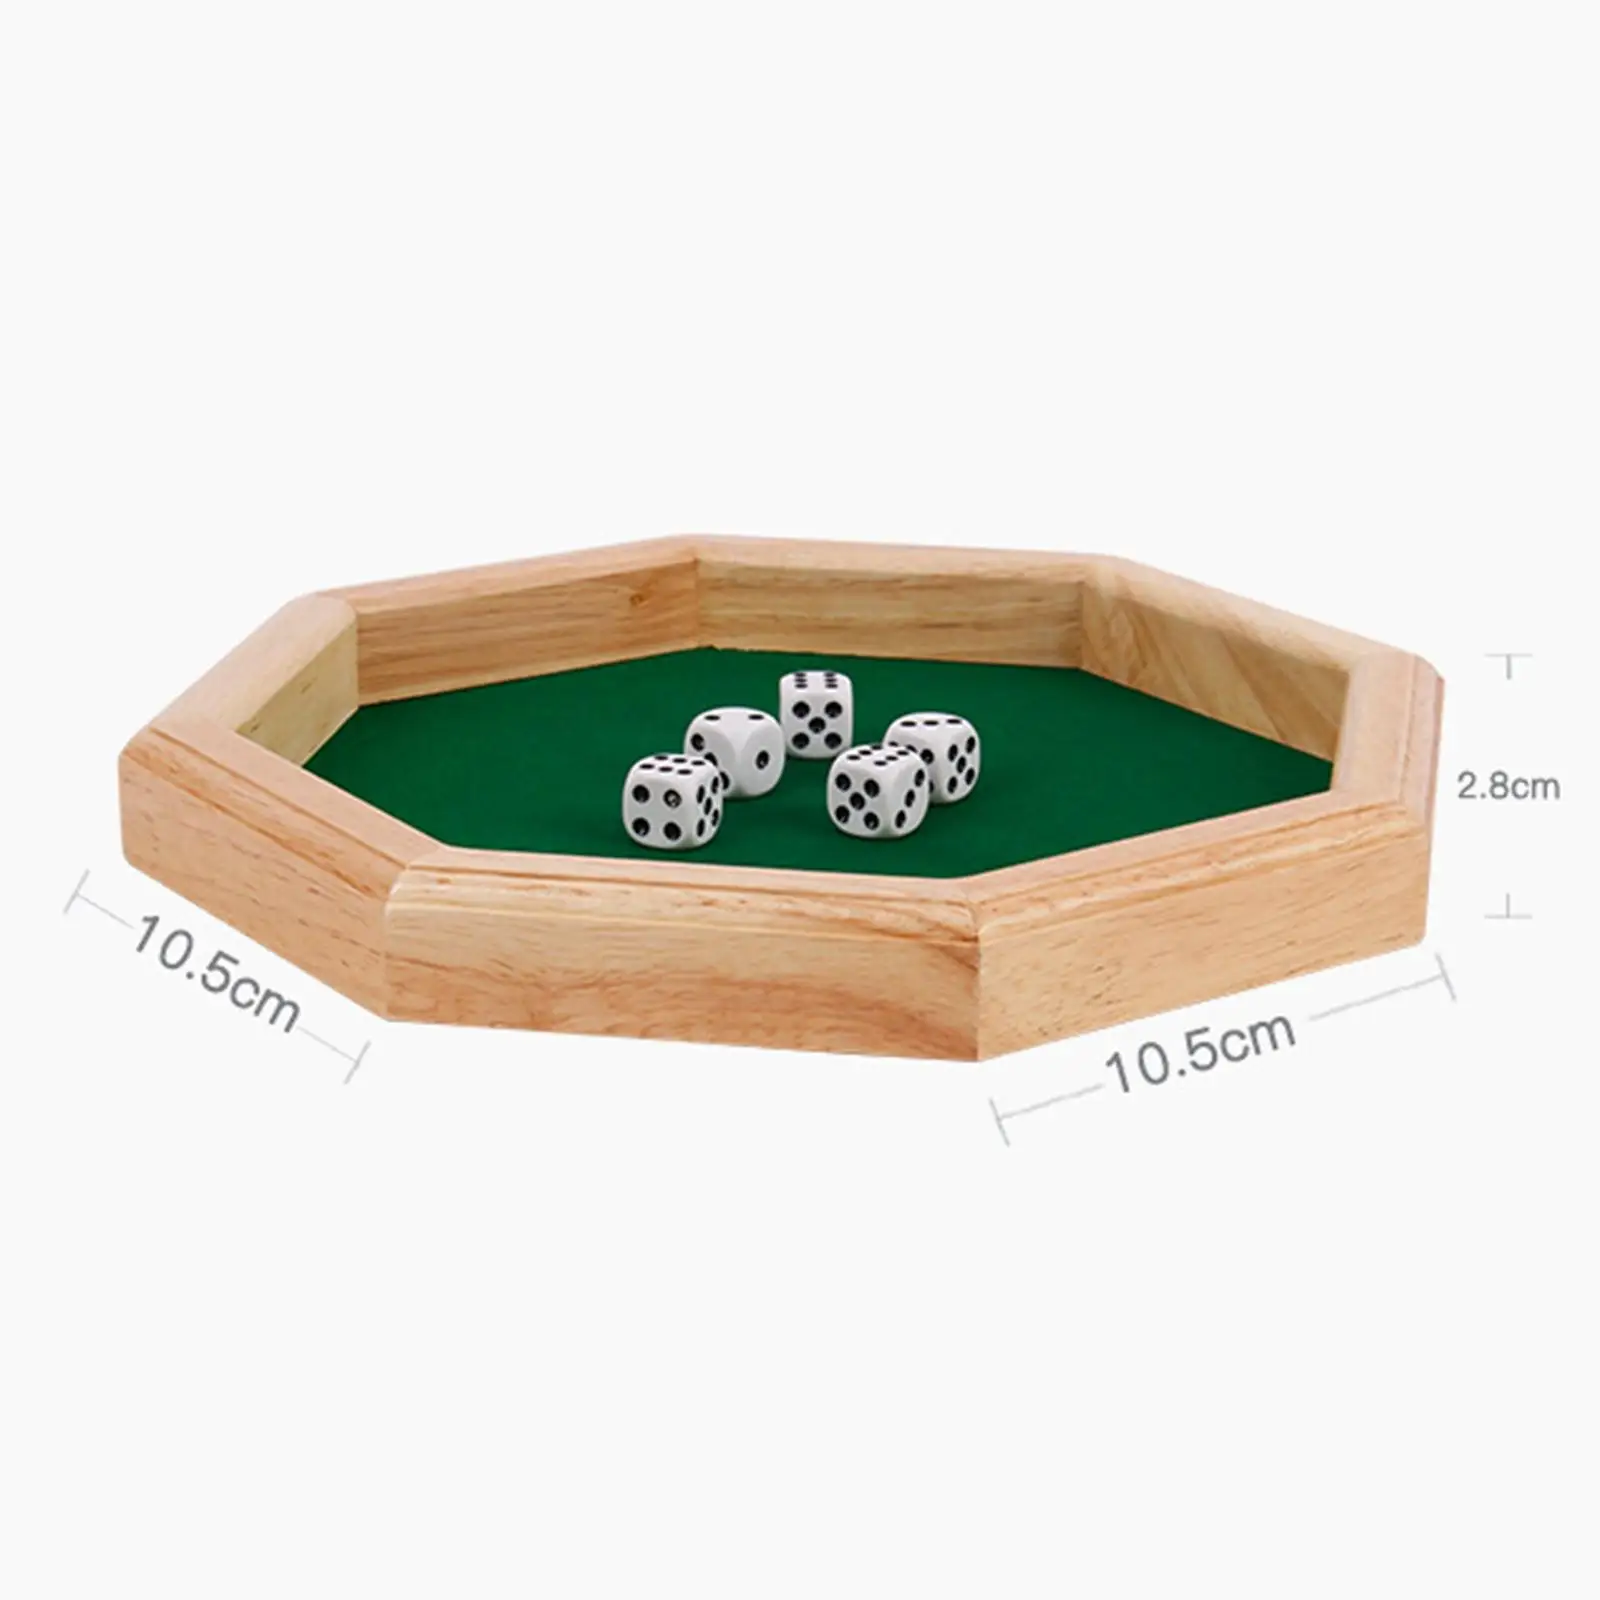 Luxury Octagonal Wooden Tray (Green, with ) for Party Games